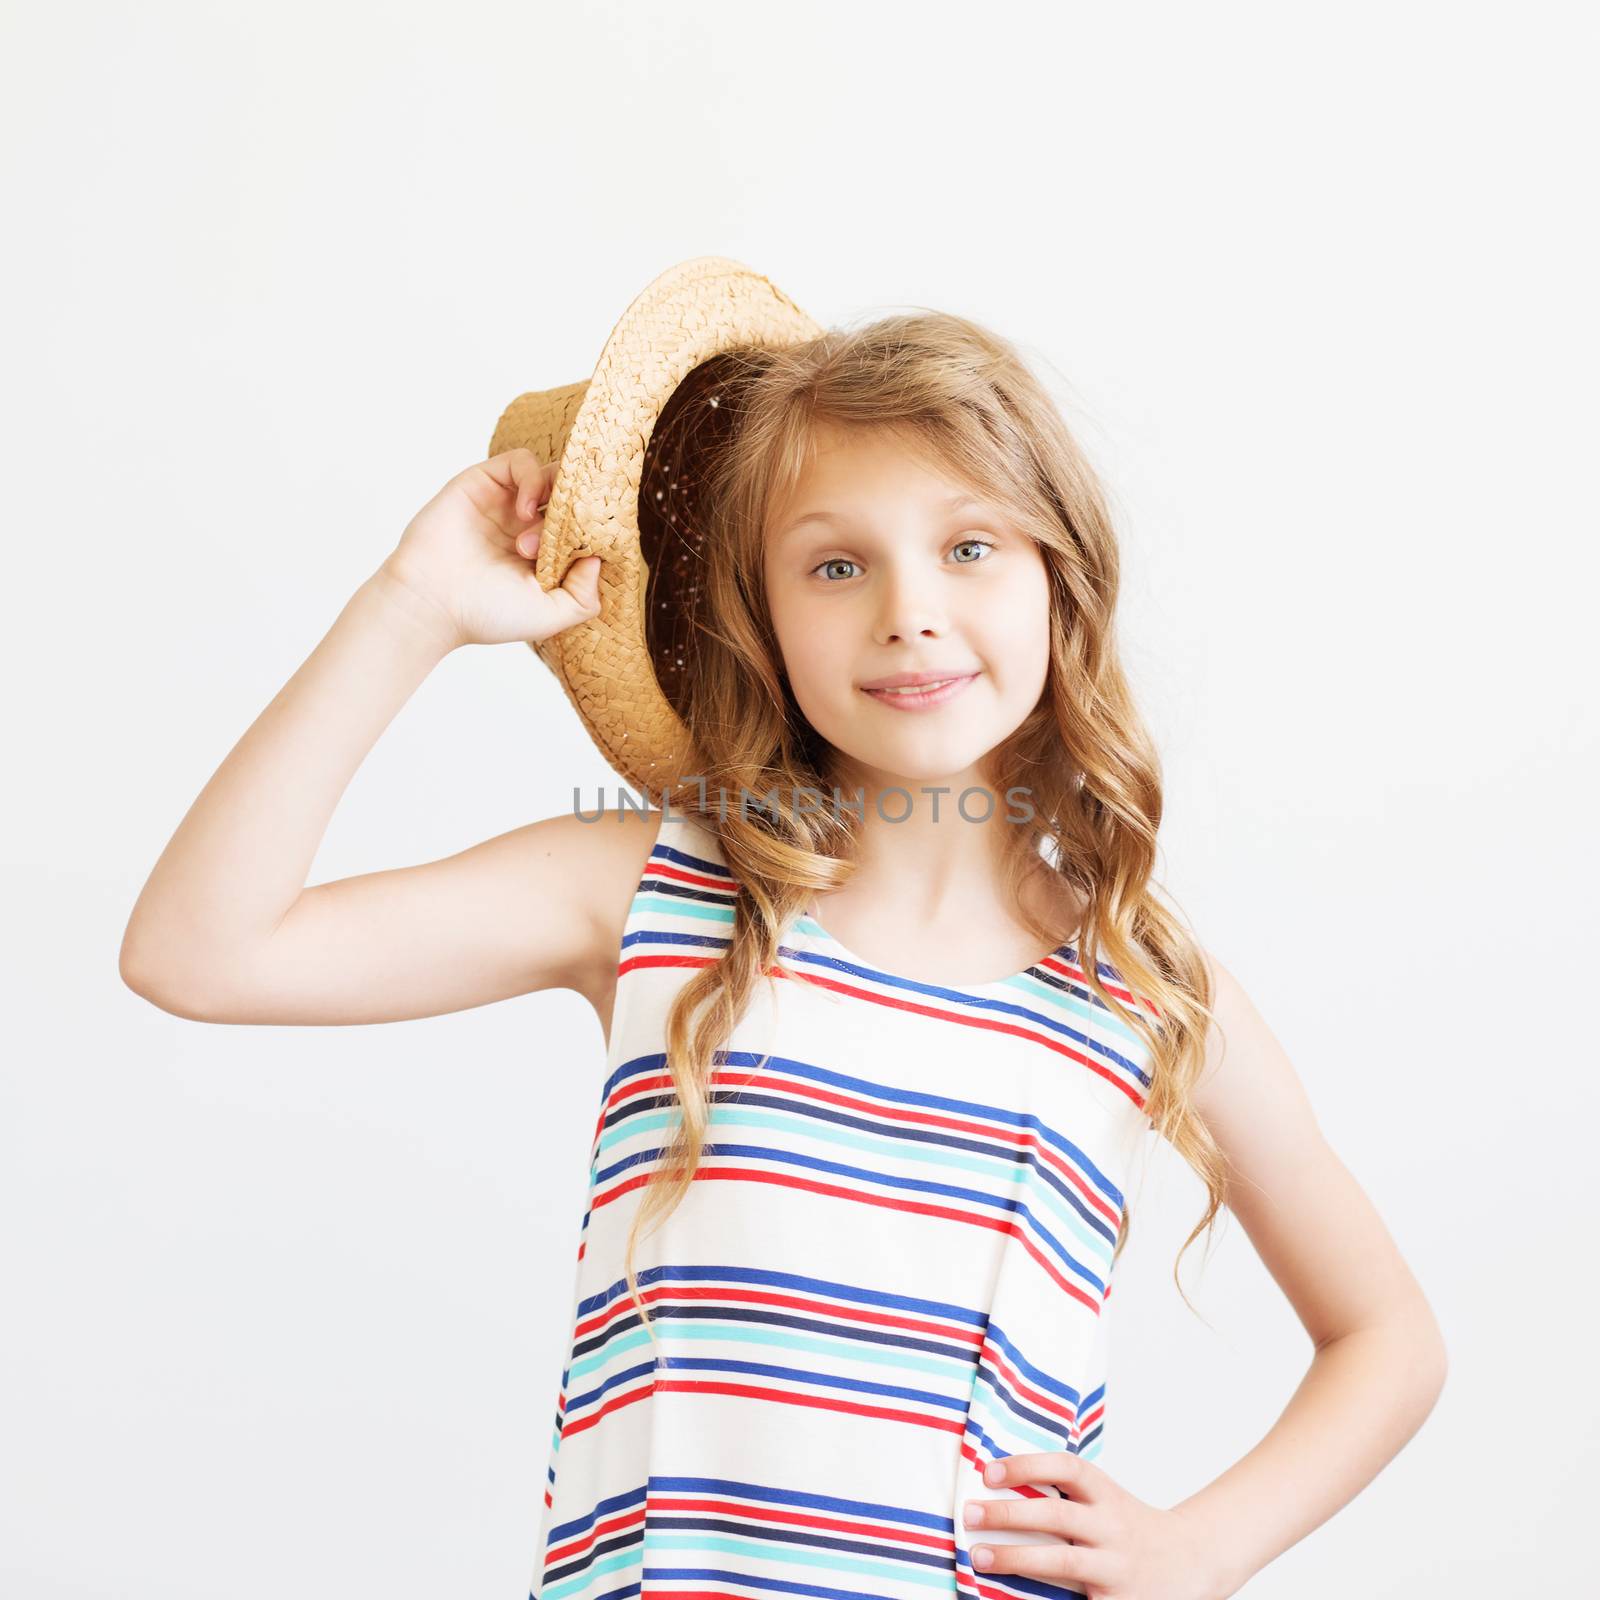 Lovely little girl with straw hat and striped dress against a white background. Happy kids